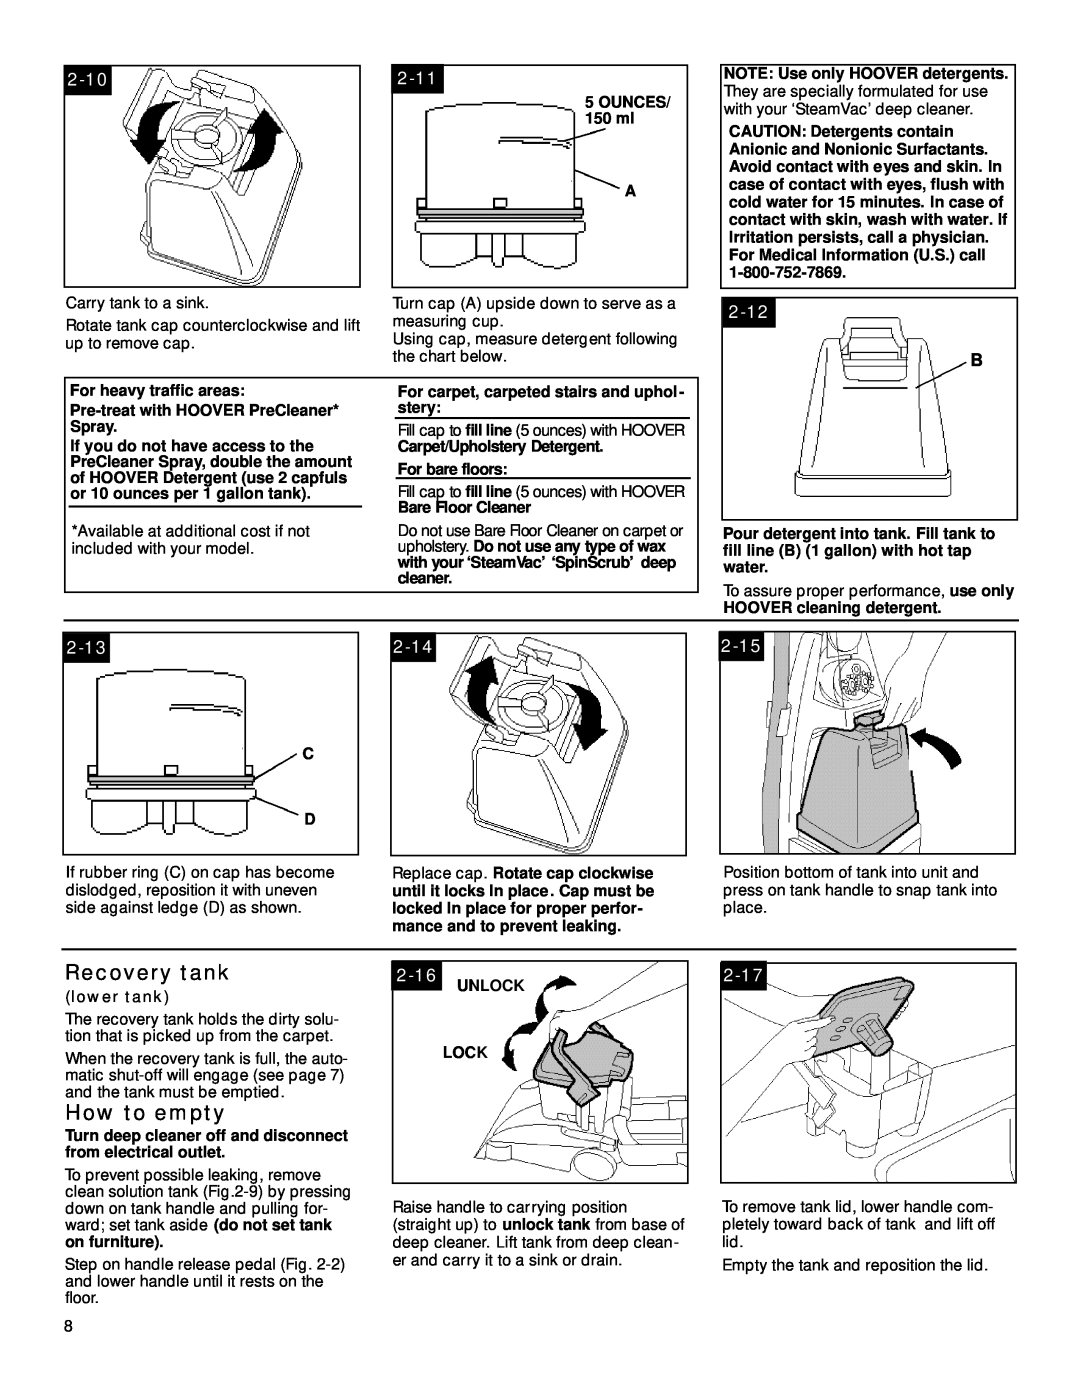 Hoover SpinScrub manual Recovery tank, How to empty, 2-102-11, 2-12, 2-13, 2-14, 2-15, 2-16, 2-17 